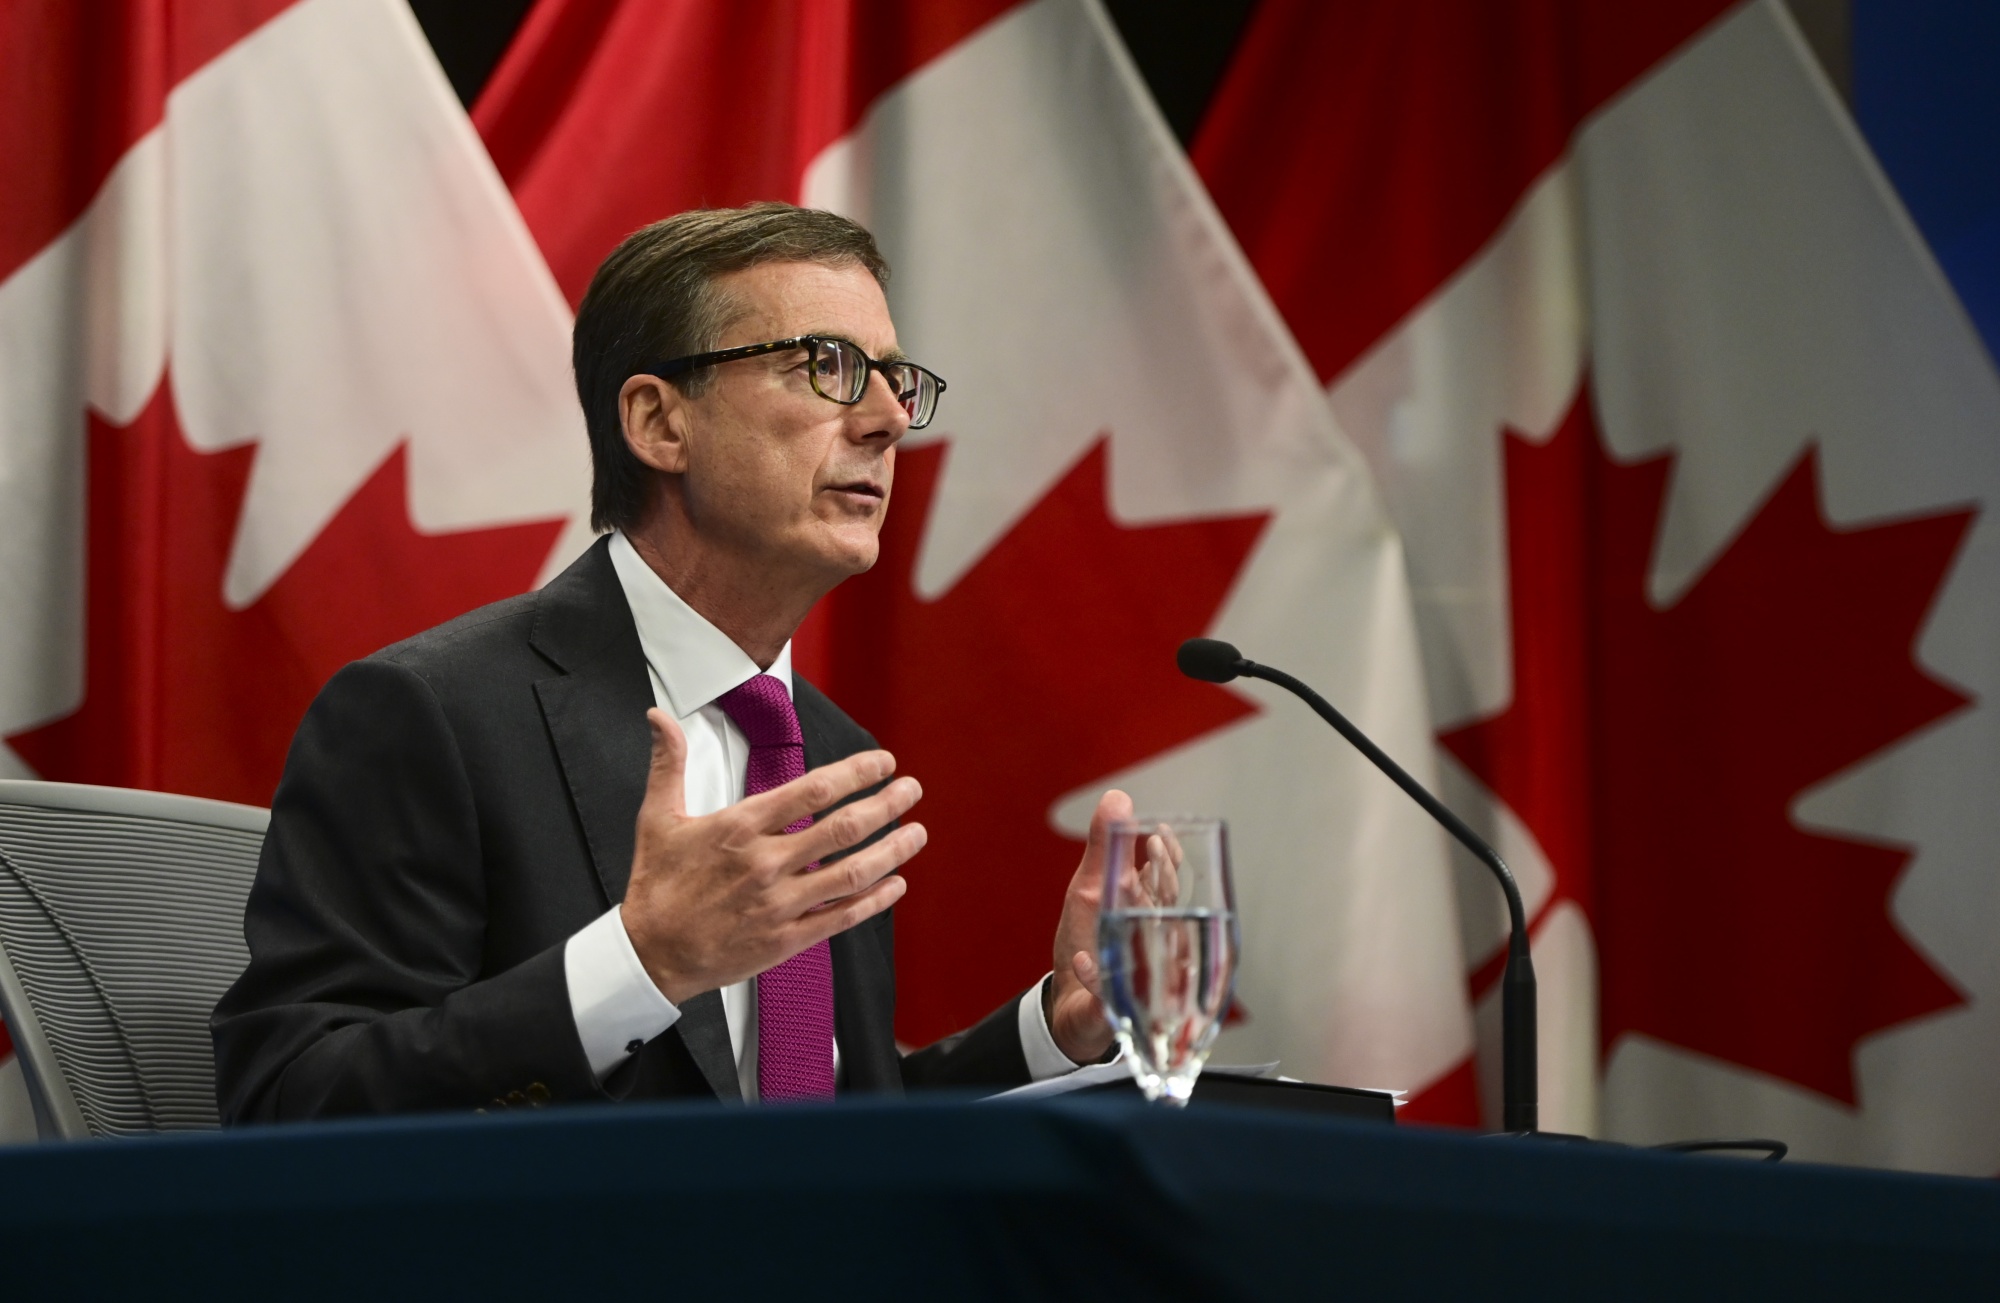 Tiff Macklem speaks during a Bank of Canada news conference in Ottawa on Oct. 28.